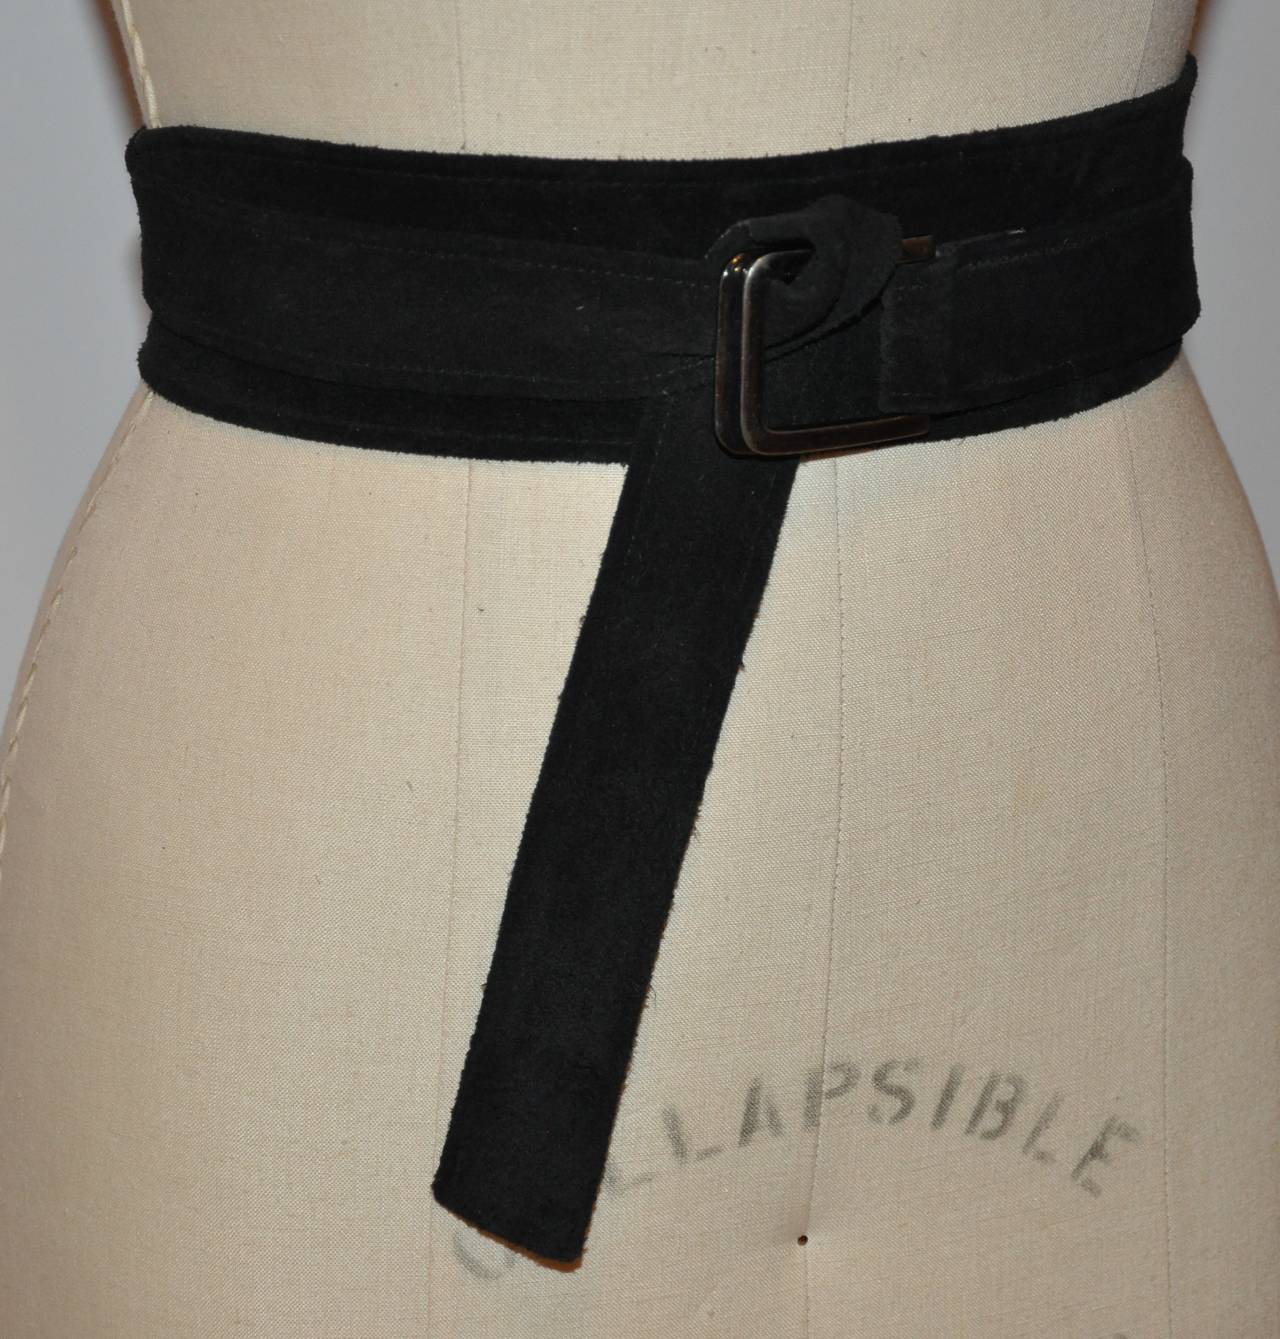 Yves Saint Laurent's double-layered calfskin suede wrap belt is accented with  a steel gun-metal hardware buckle. The belt measures 1 1/4